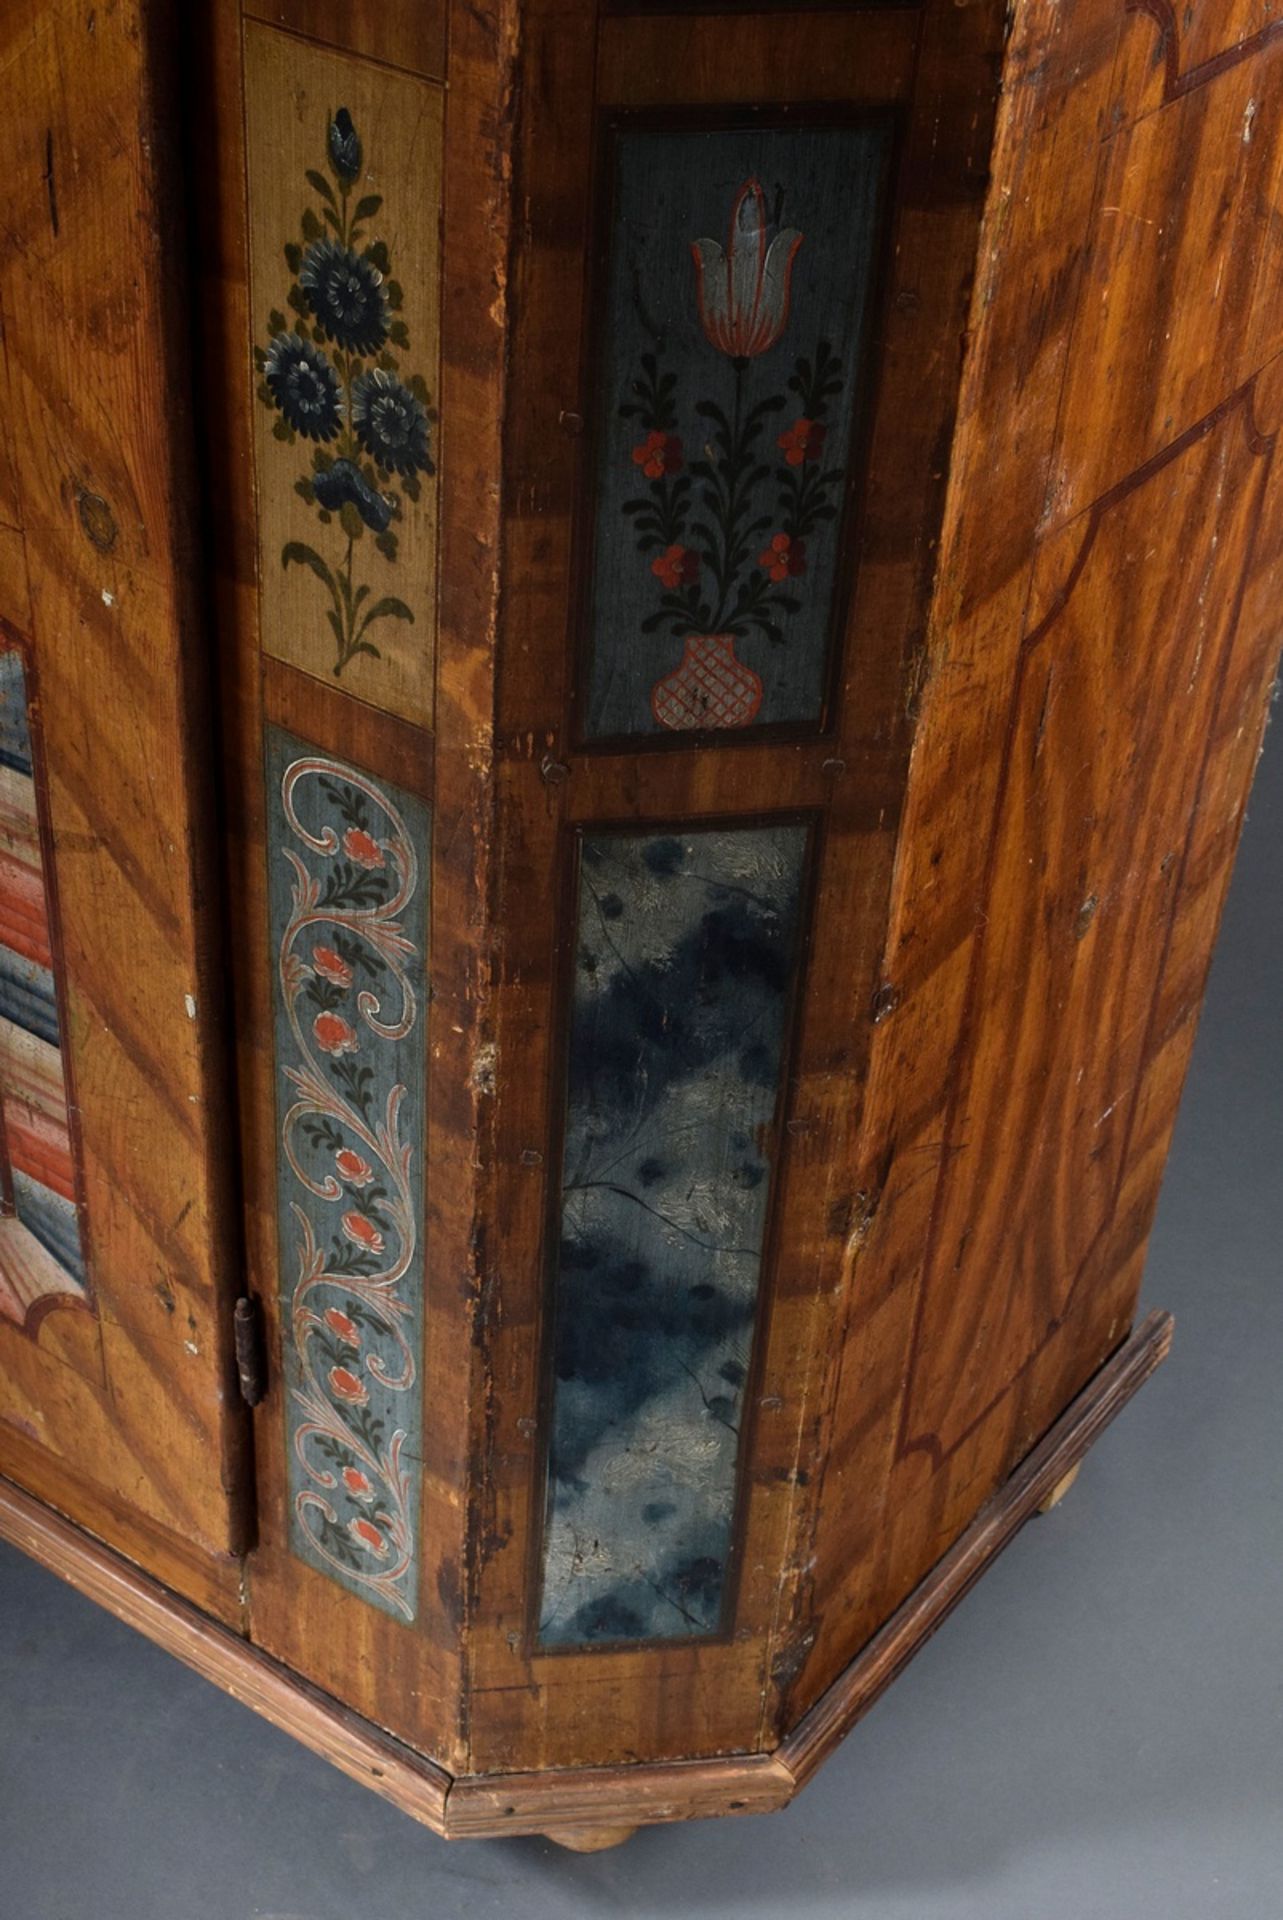 Small single-door Alpine peasant cabinet with floral painting, dated 1809, softwood, 176x91x65cm - Image 7 of 11